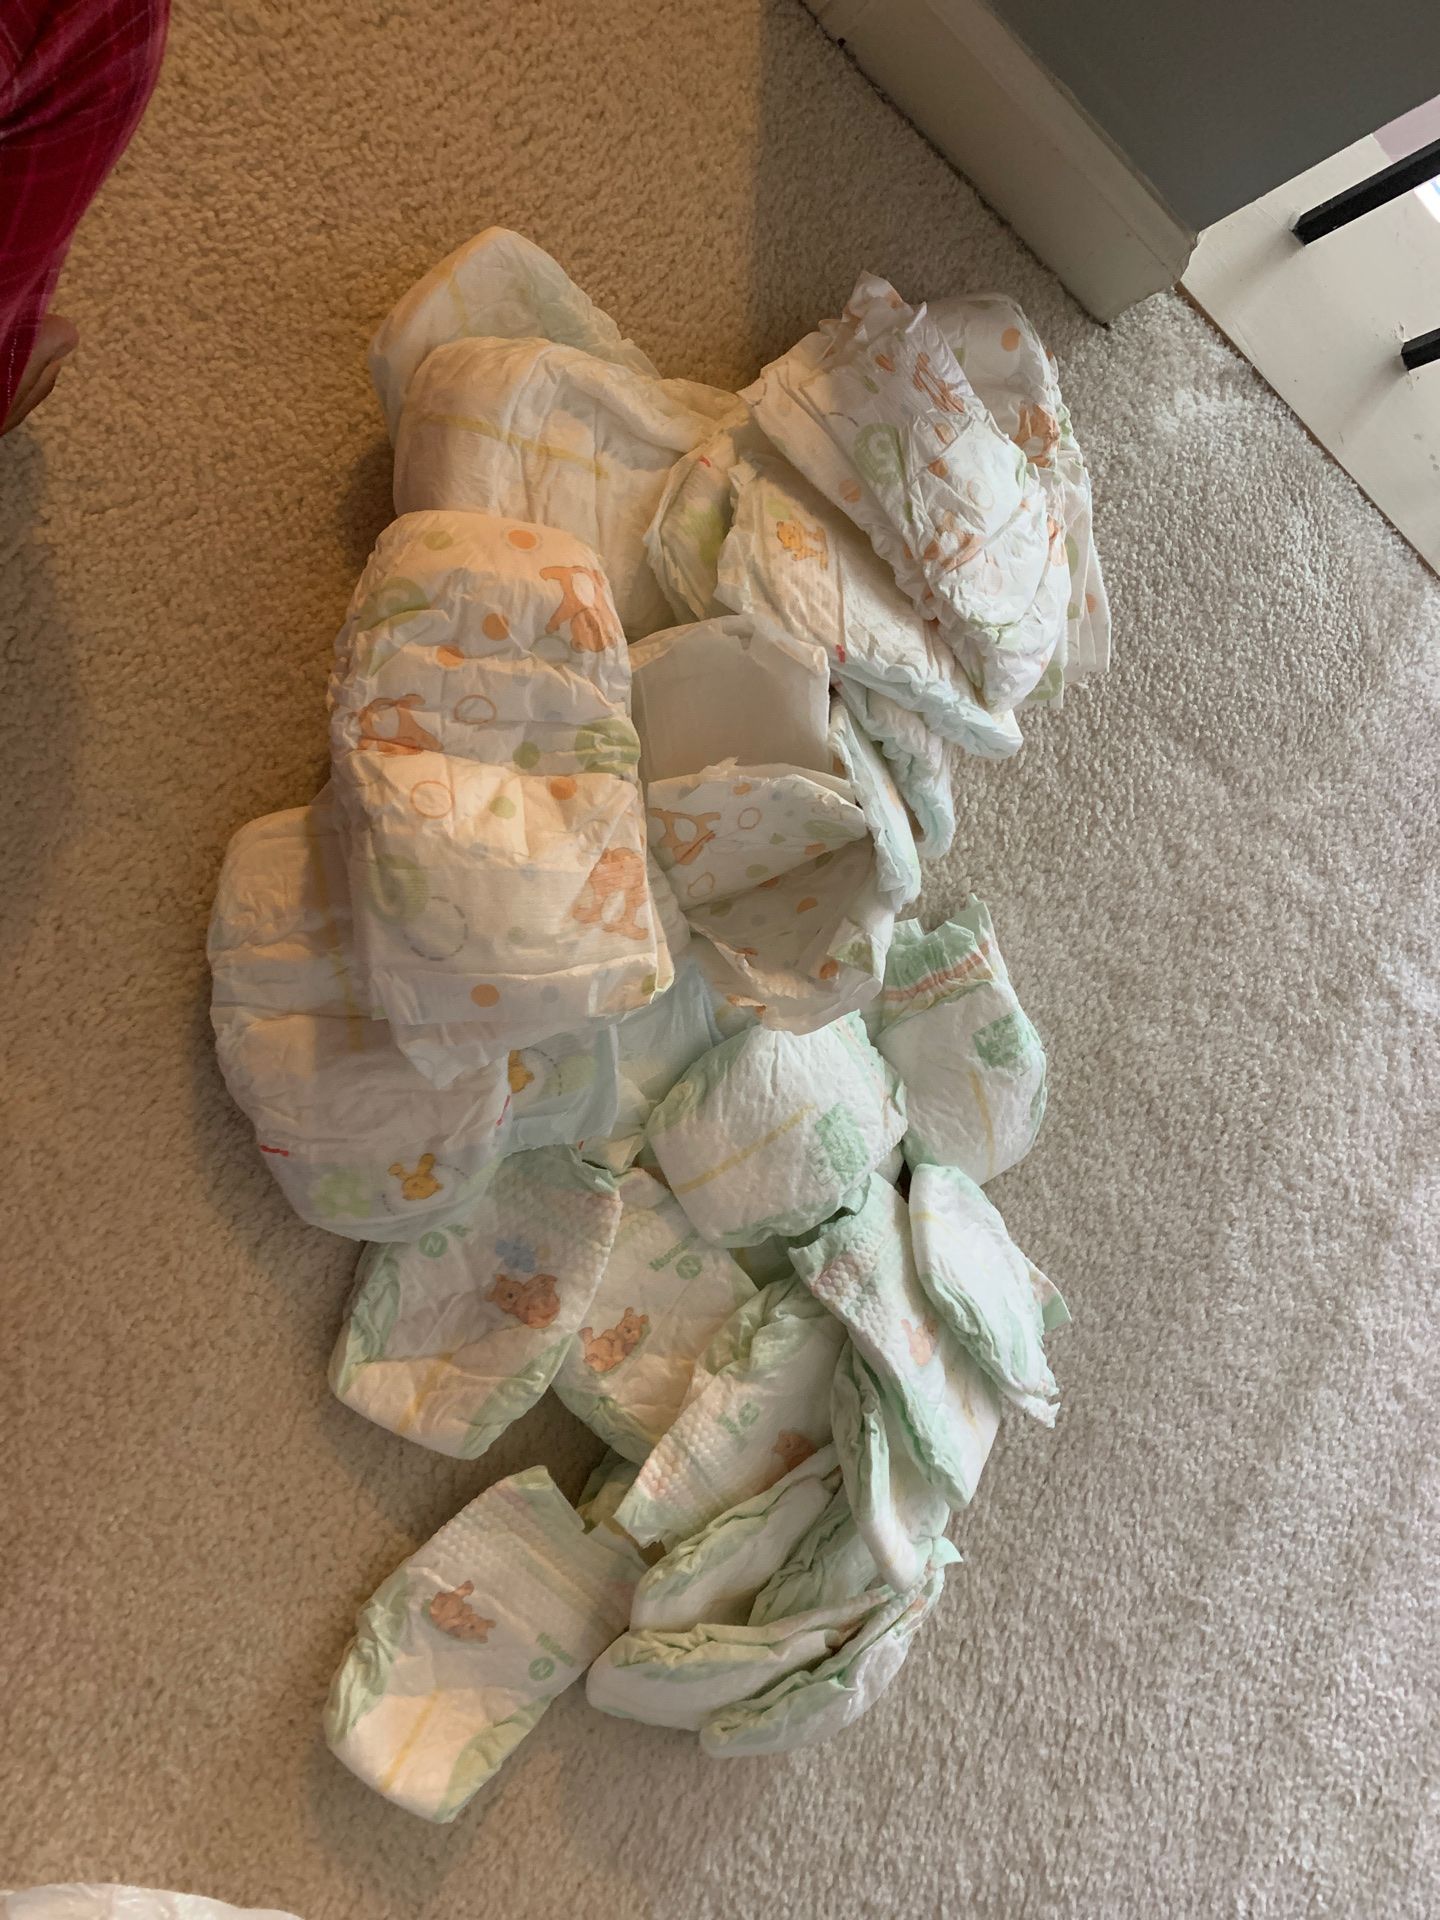 Newborn Huggies diapers! Selling whole bag for $5